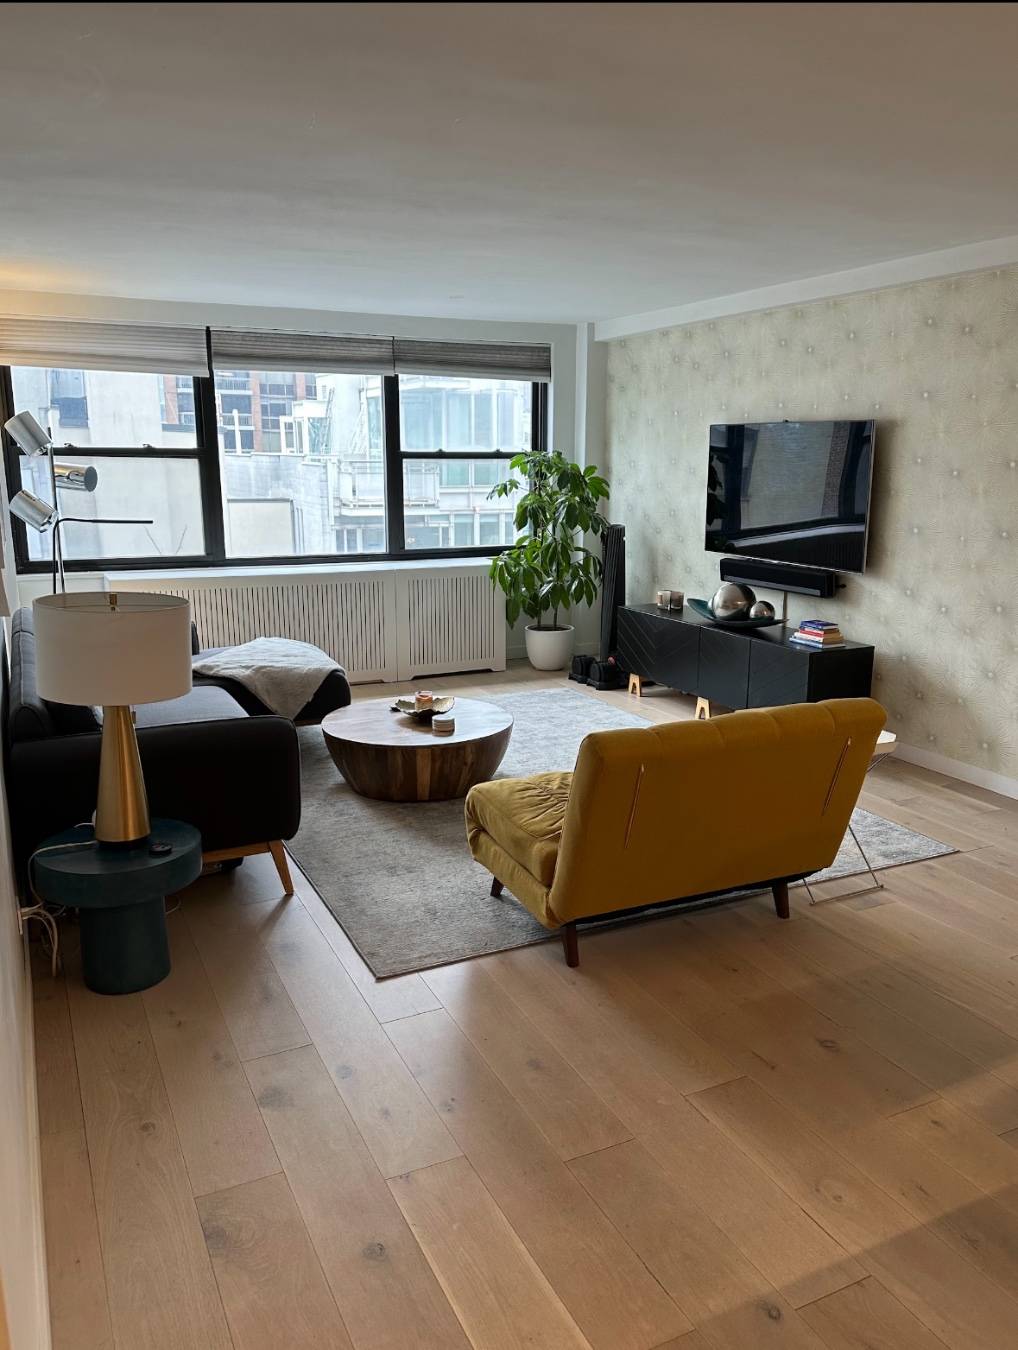 This generously proportioned 1 bedroom apartment offers an open floor plan with a stylish new renovation recently gut renovated.